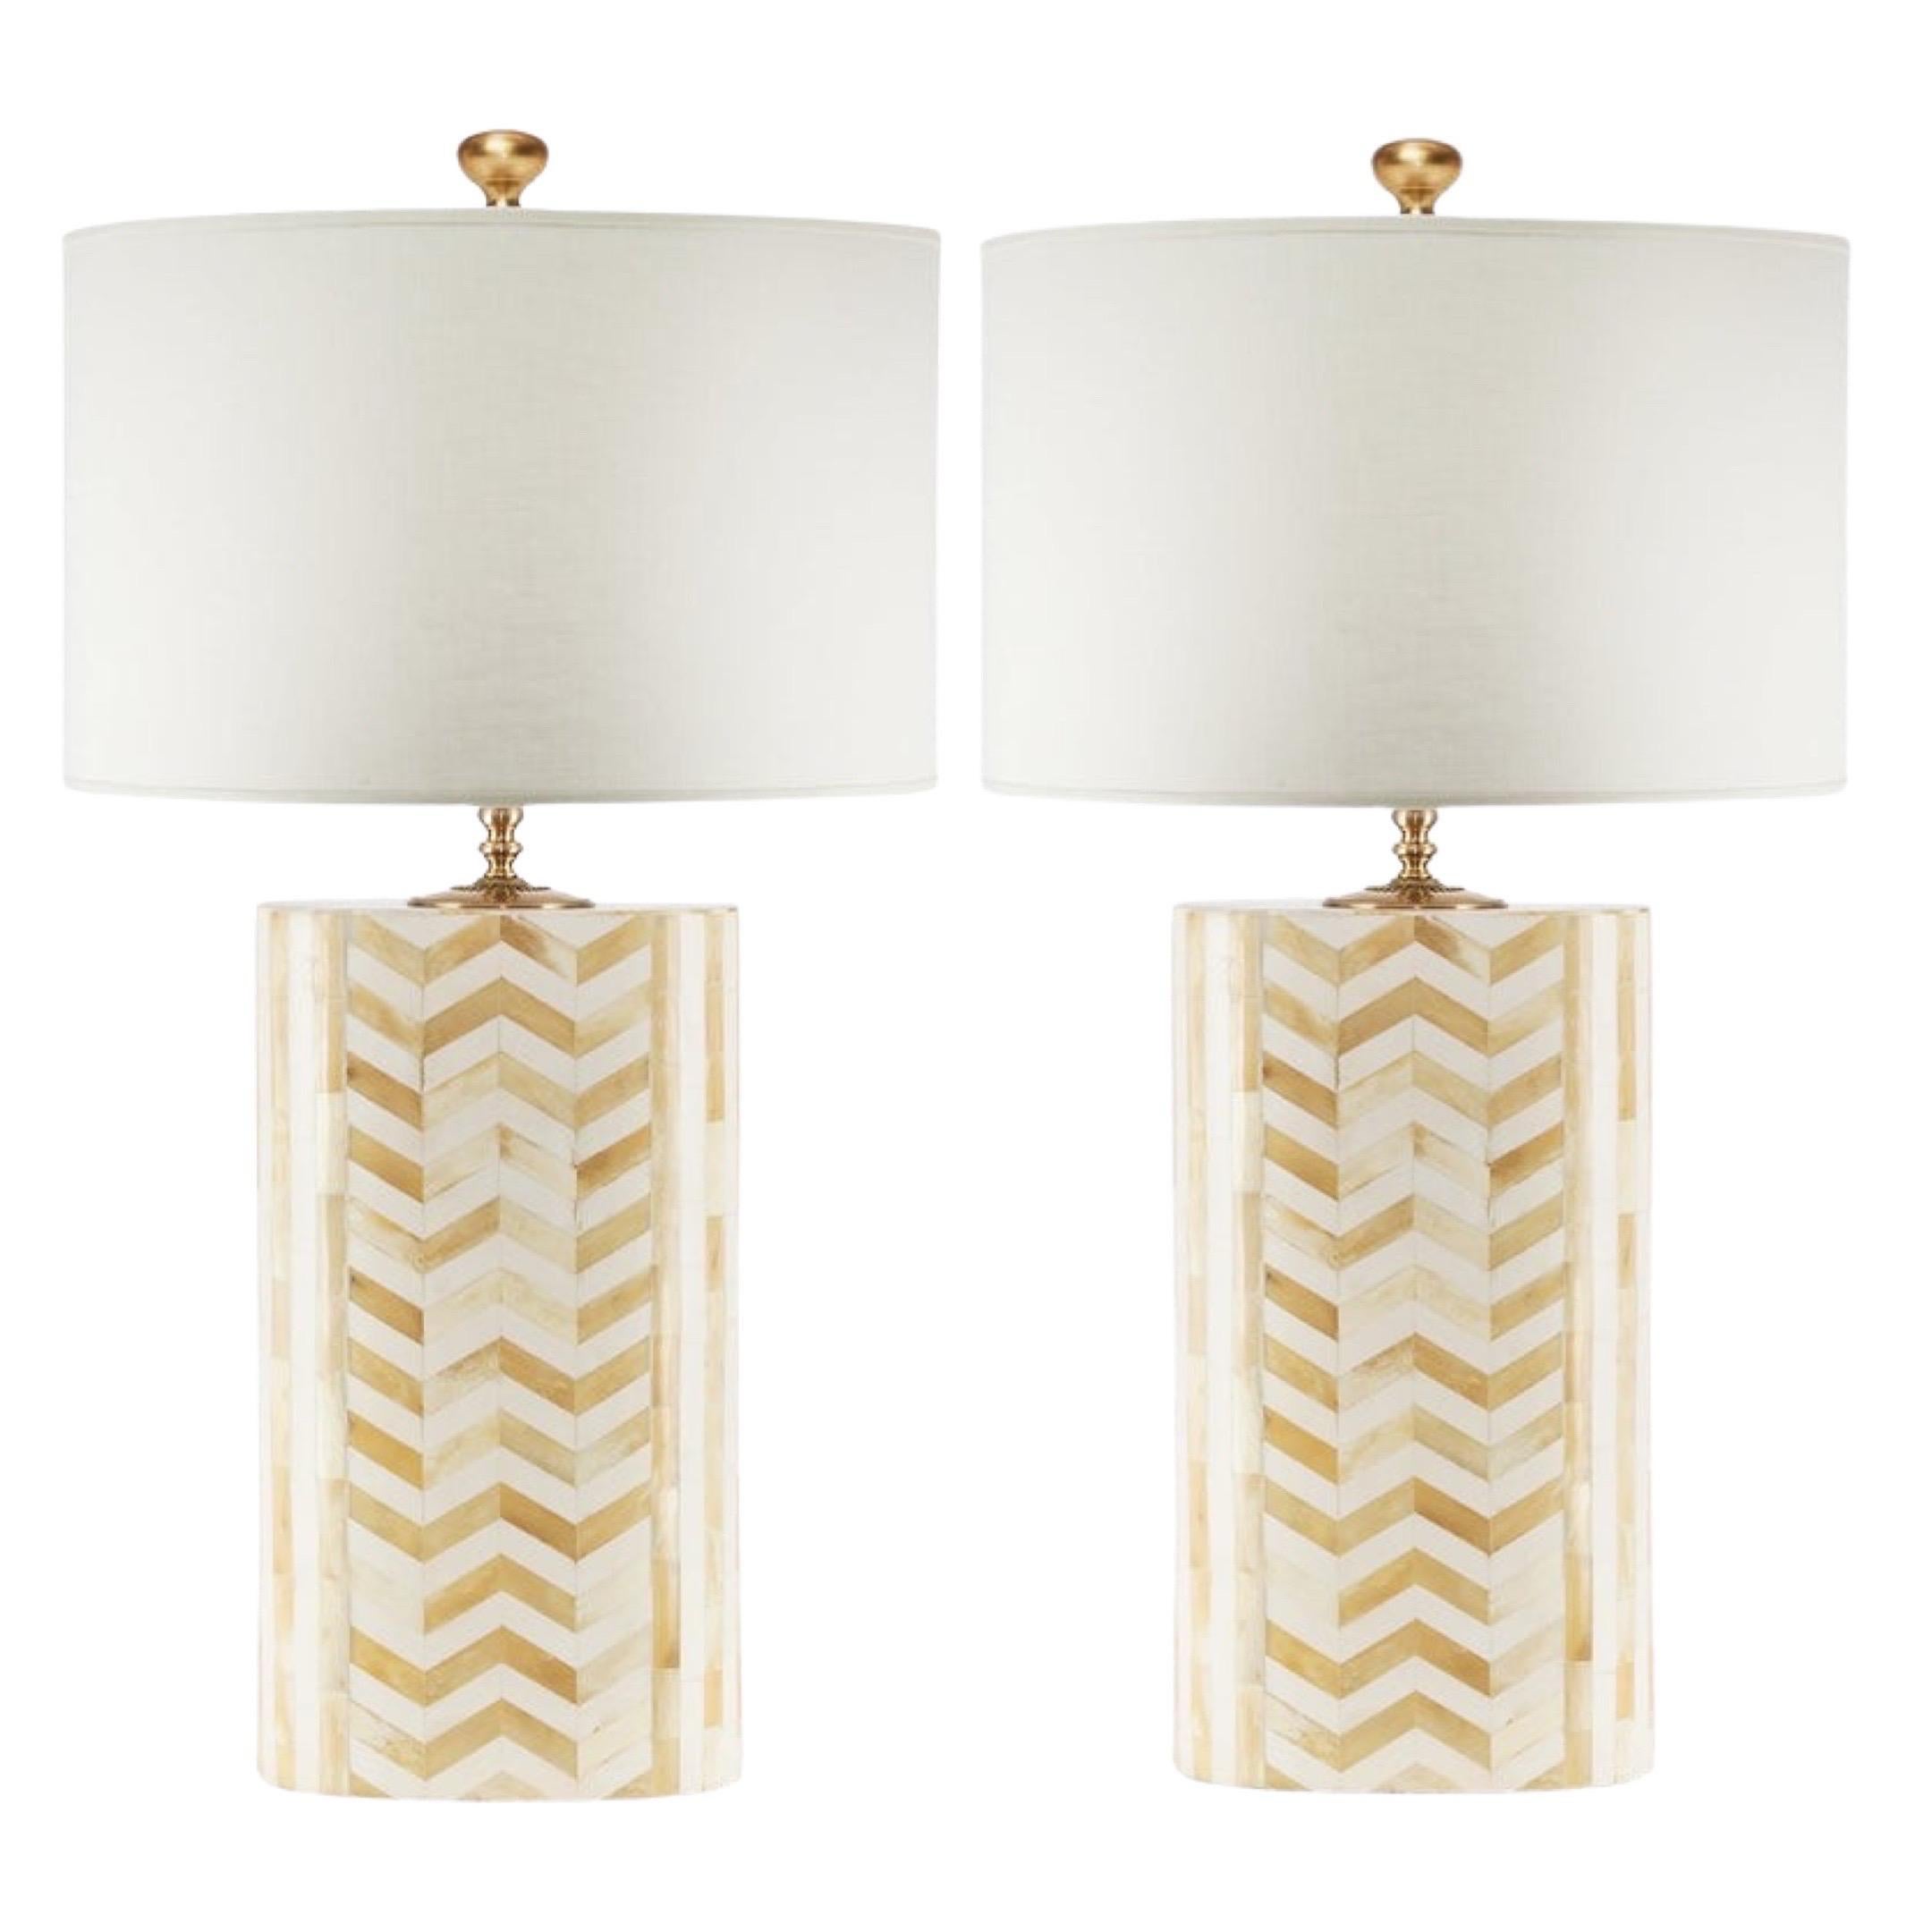 Pair of Beige/Cream Hand Crafted Tessellated Bone & Gold Lamps w/ Shades  